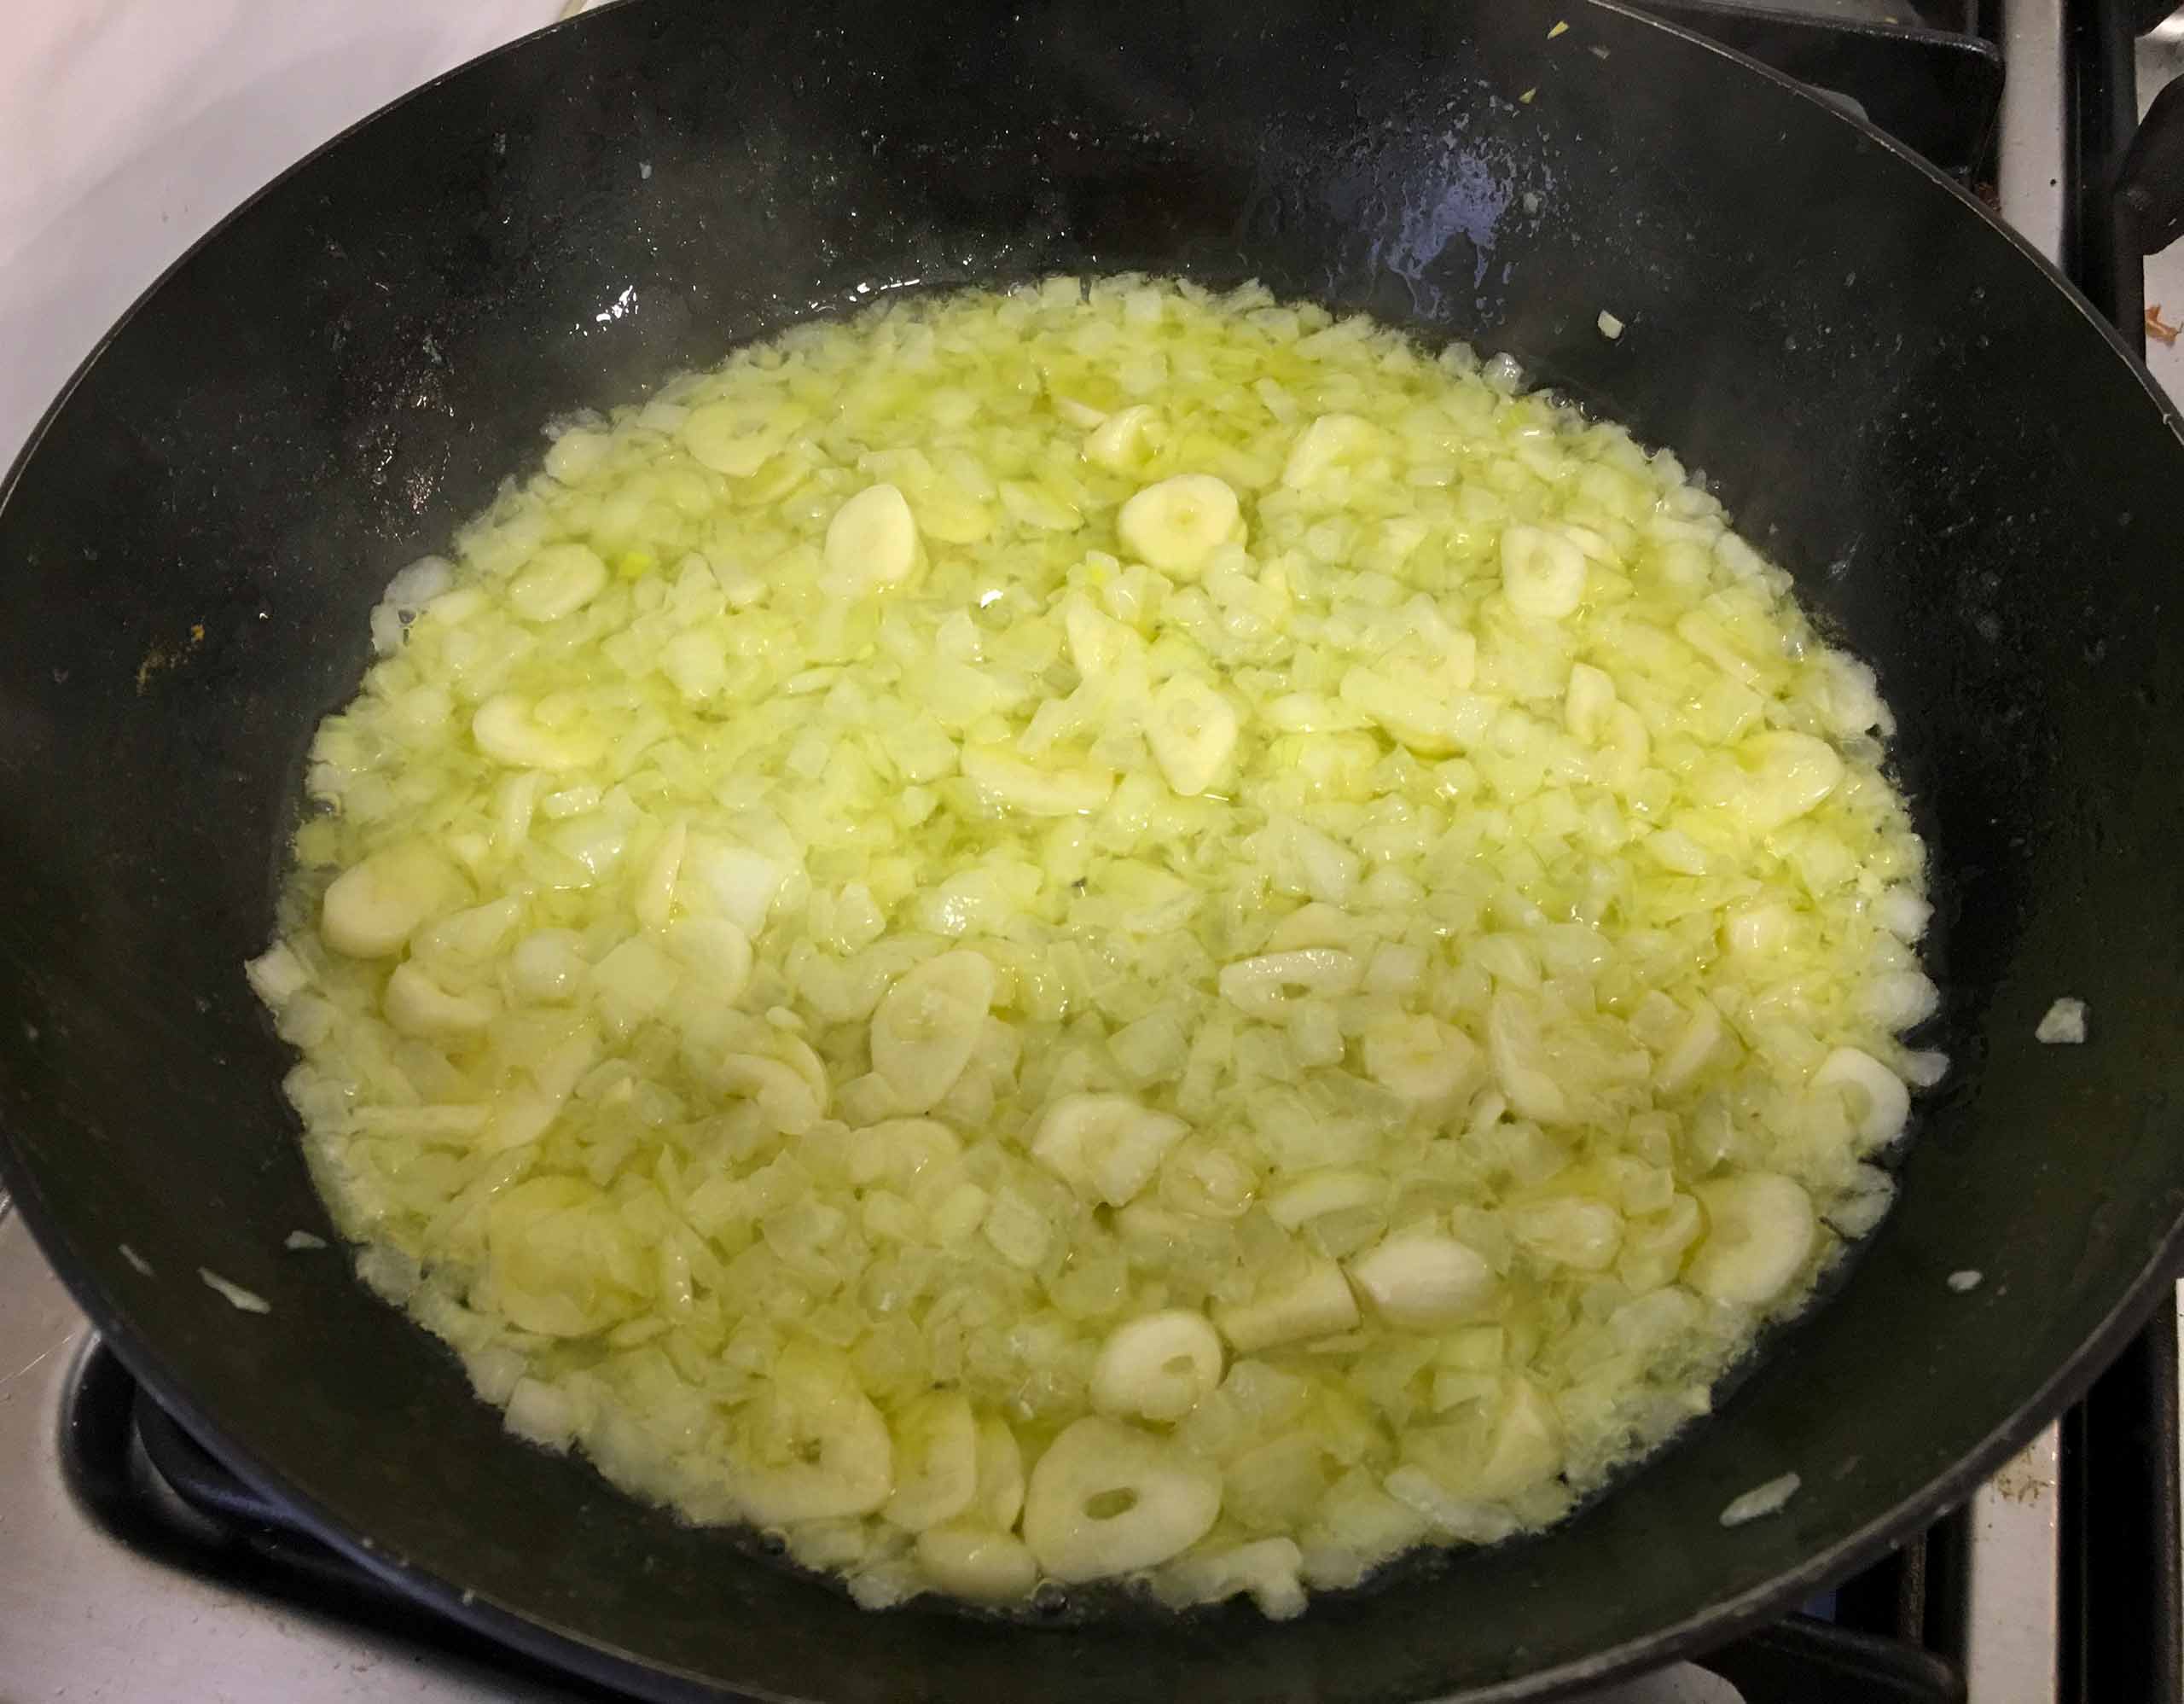 Add the shallots, garlic, and salt. caramelize the onion and garlic around 5 minutes until lightly browned.